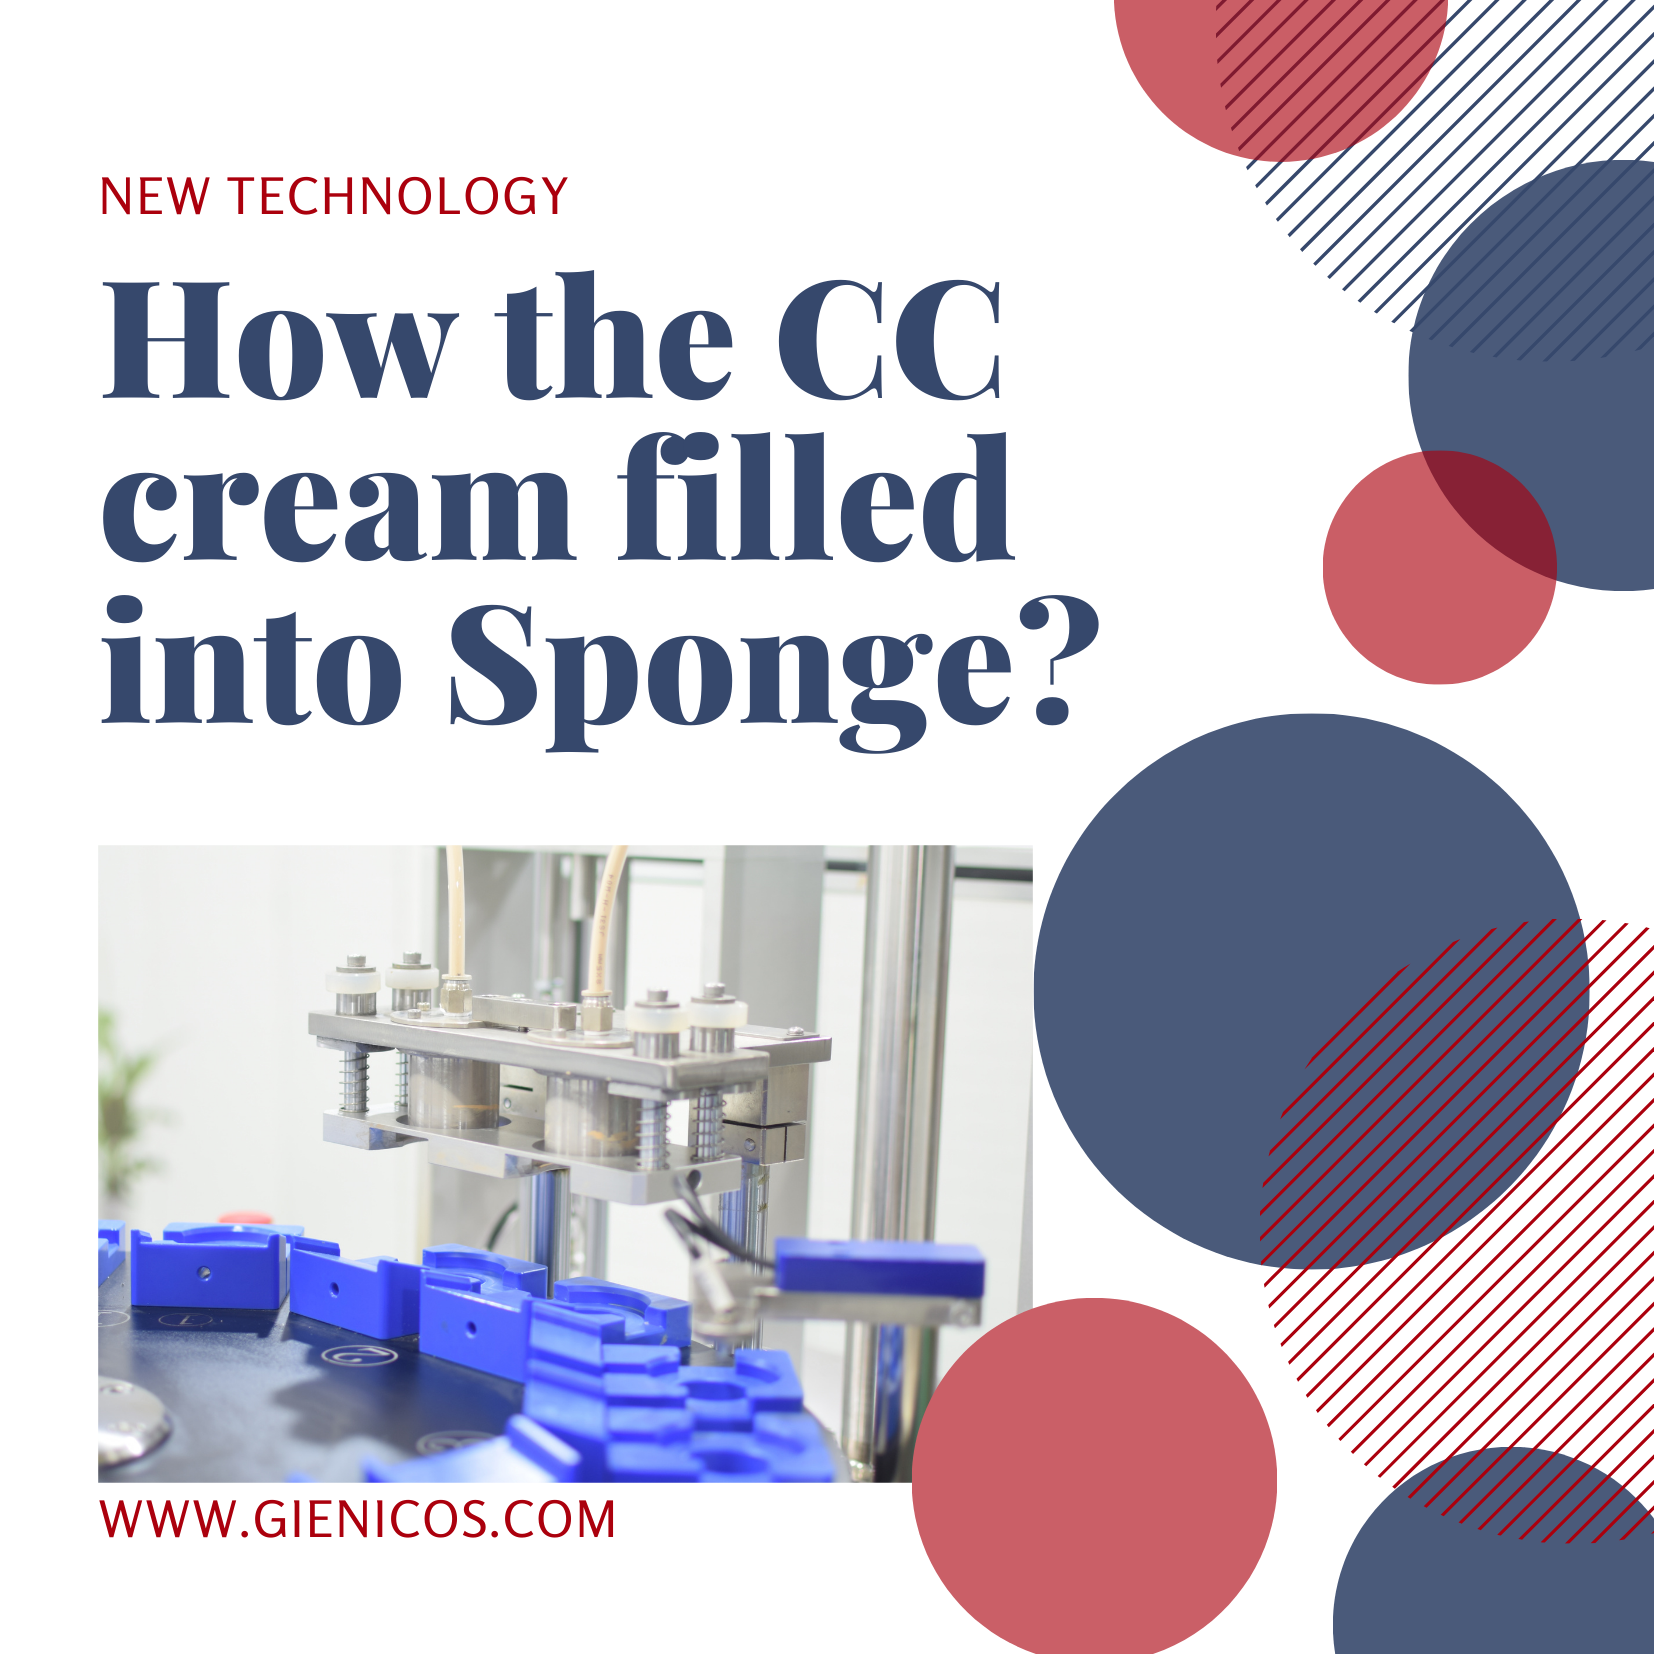 HOW THE CC CREAM FILLED INTO SPONGE What is the CC cream?